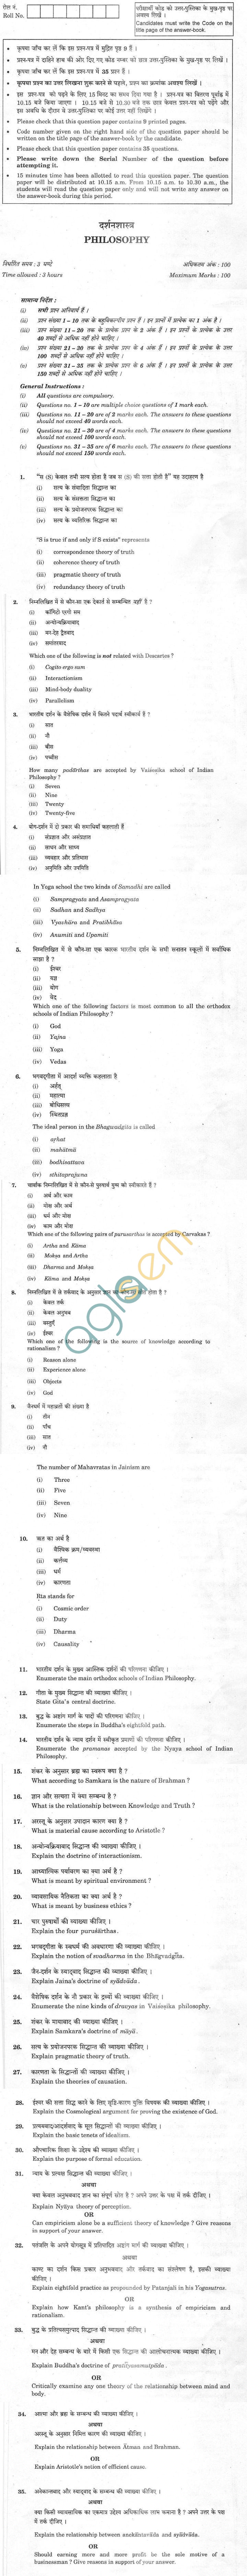 CBSE Compartment Exam 2013 Class XII Question Paper - Philosophy